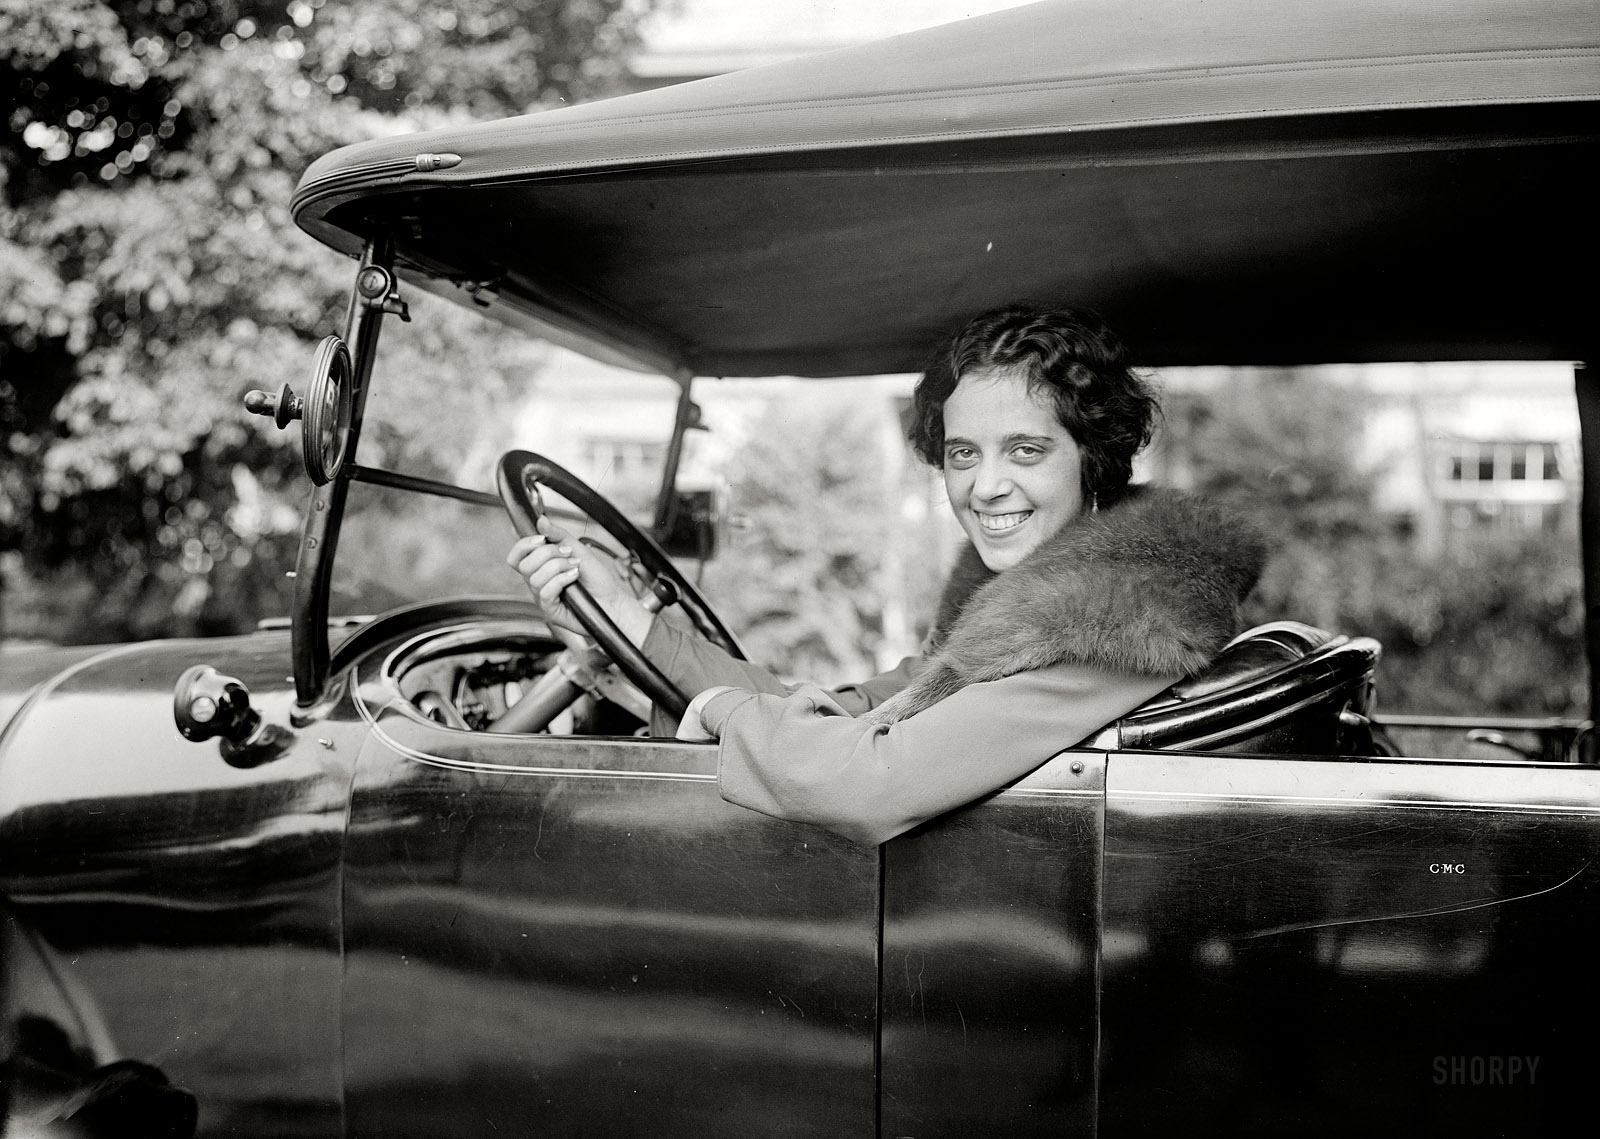 New York circa 1925. "McCall." Marion McCall Converse, the future ex-wife of Converse M. Converse, a society couple whose split came in a much-publicized divorce. 5x7 glass negative, George Grantham Bain Collection. View full size.